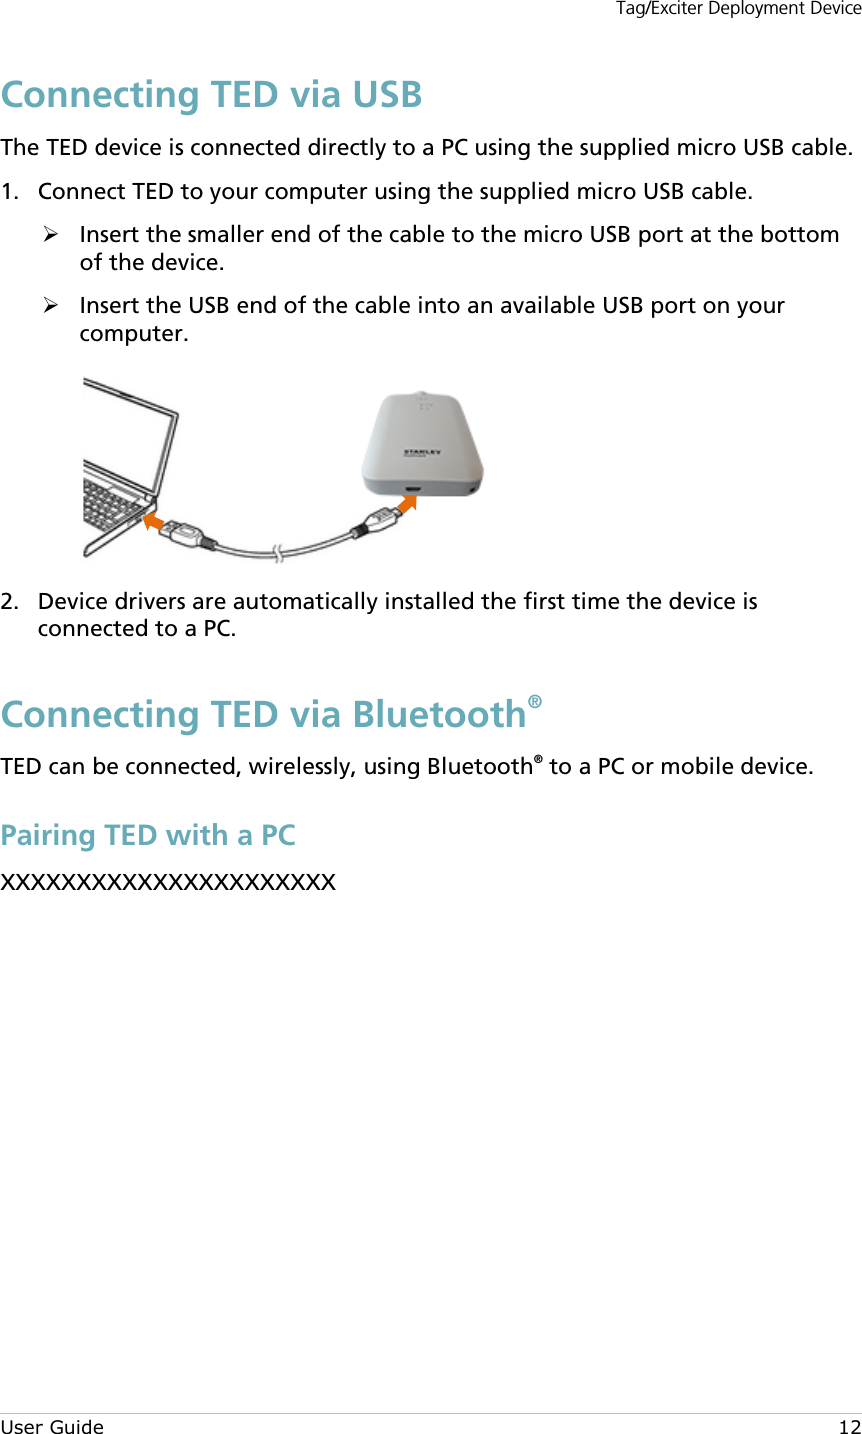 Tag/Exciter Deployment Device User Guide 12 Connecting TED via USB The TED device is connected directly to a PC using the supplied micro USB cable.  Connect TED to your computer using the supplied micro USB cable. 1. Insert the smaller end of the cable to the micro USB port at the bottom of the device.  Insert the USB end of the cable into an available USB port on your computer.    Device drivers are automatically installed the first time the device is 2.connected to a PC. Connecting TED via Bluetooth® TED can be connected, wirelessly, using Bluetooth® to a PC or mobile device. Pairing TED with a PC XXXXXXXXXXXXXXXXXXXXXX           